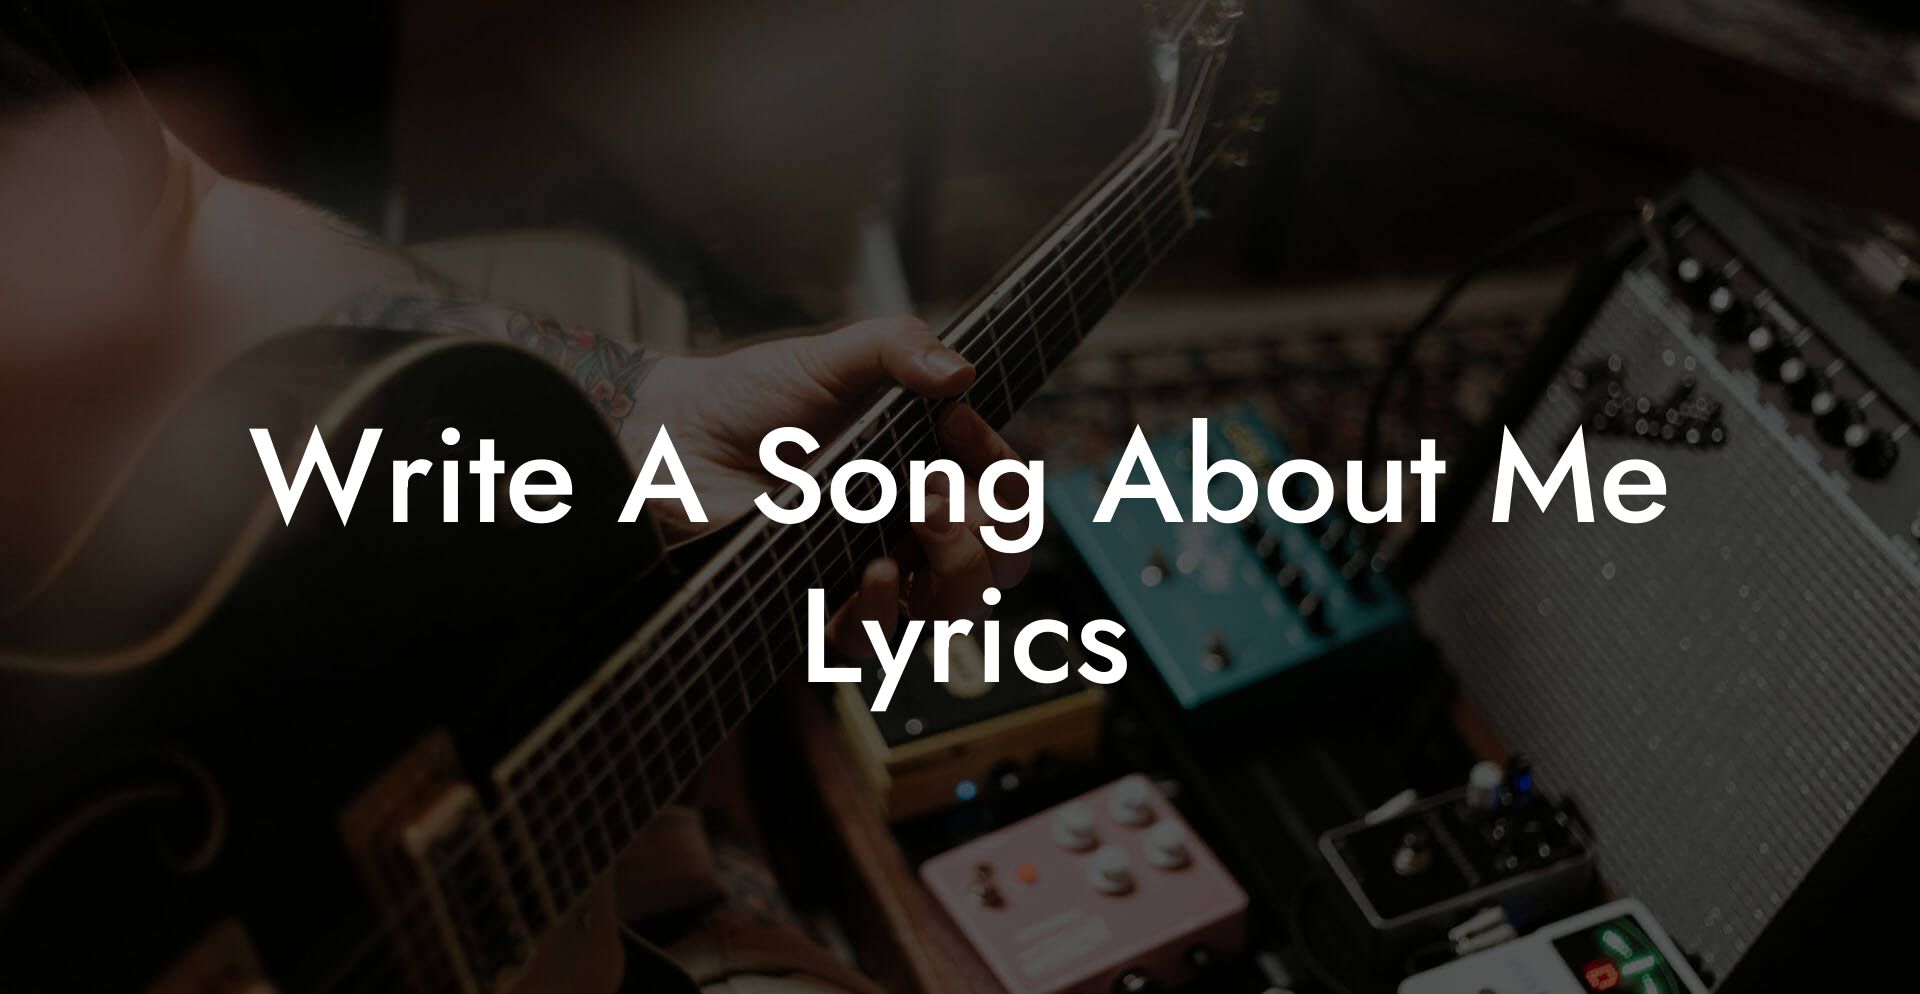 write a song about me lyrics lyric assistant